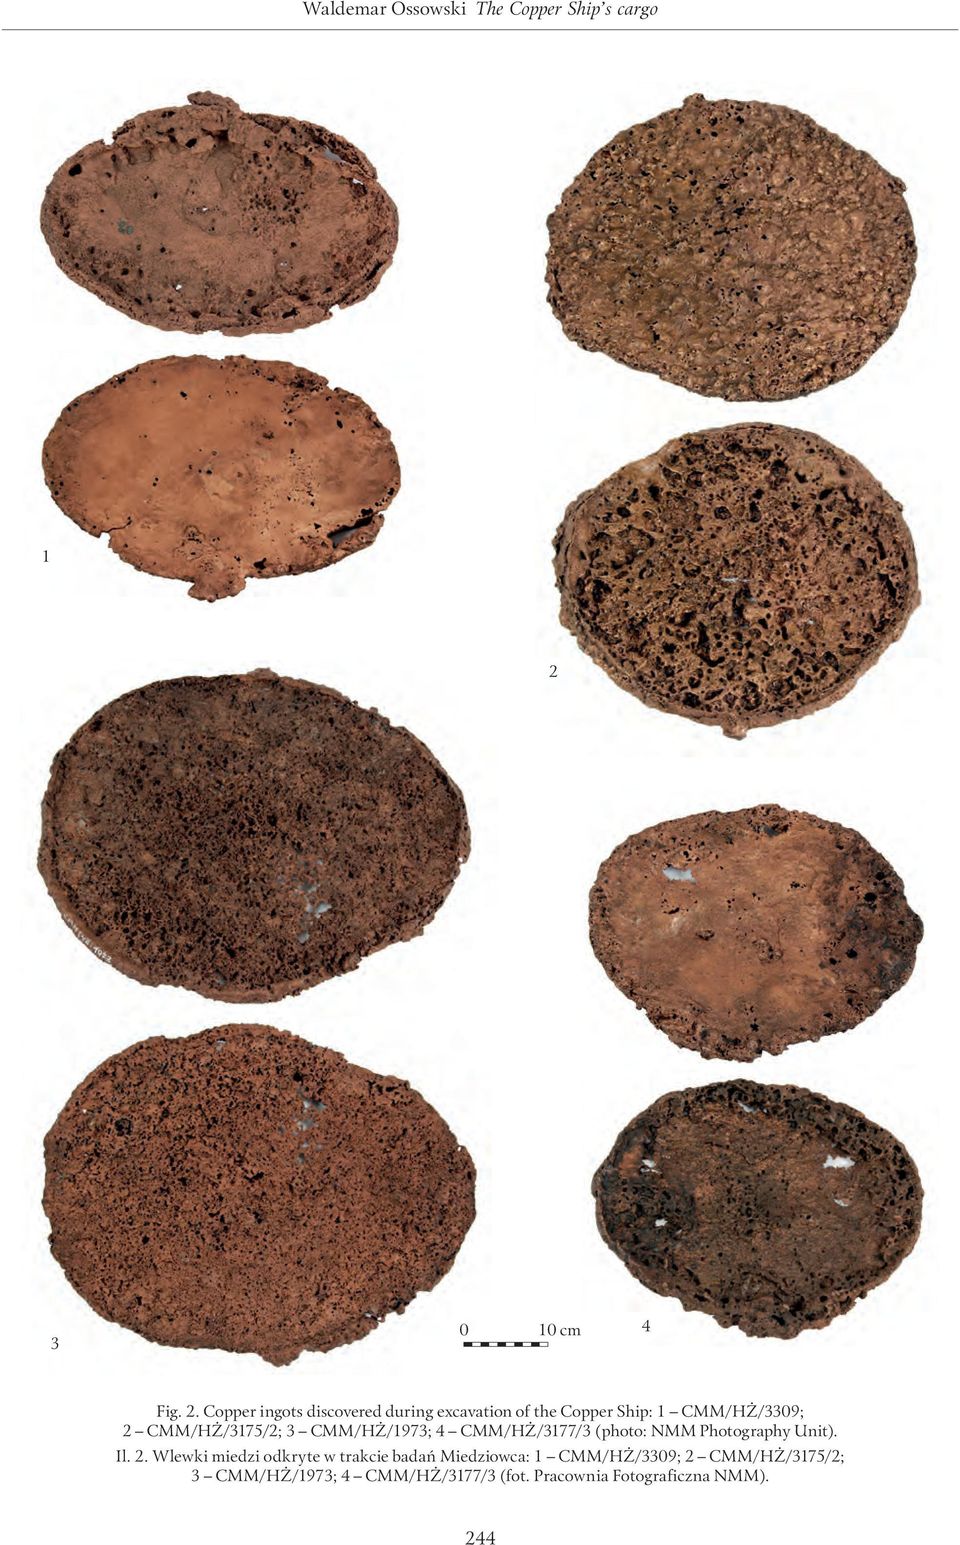 Copper ingots discovered during excavation of the Copper Ship: 1 CMM/HŻ/3309; 2 CMM/HŻ/3175/2;